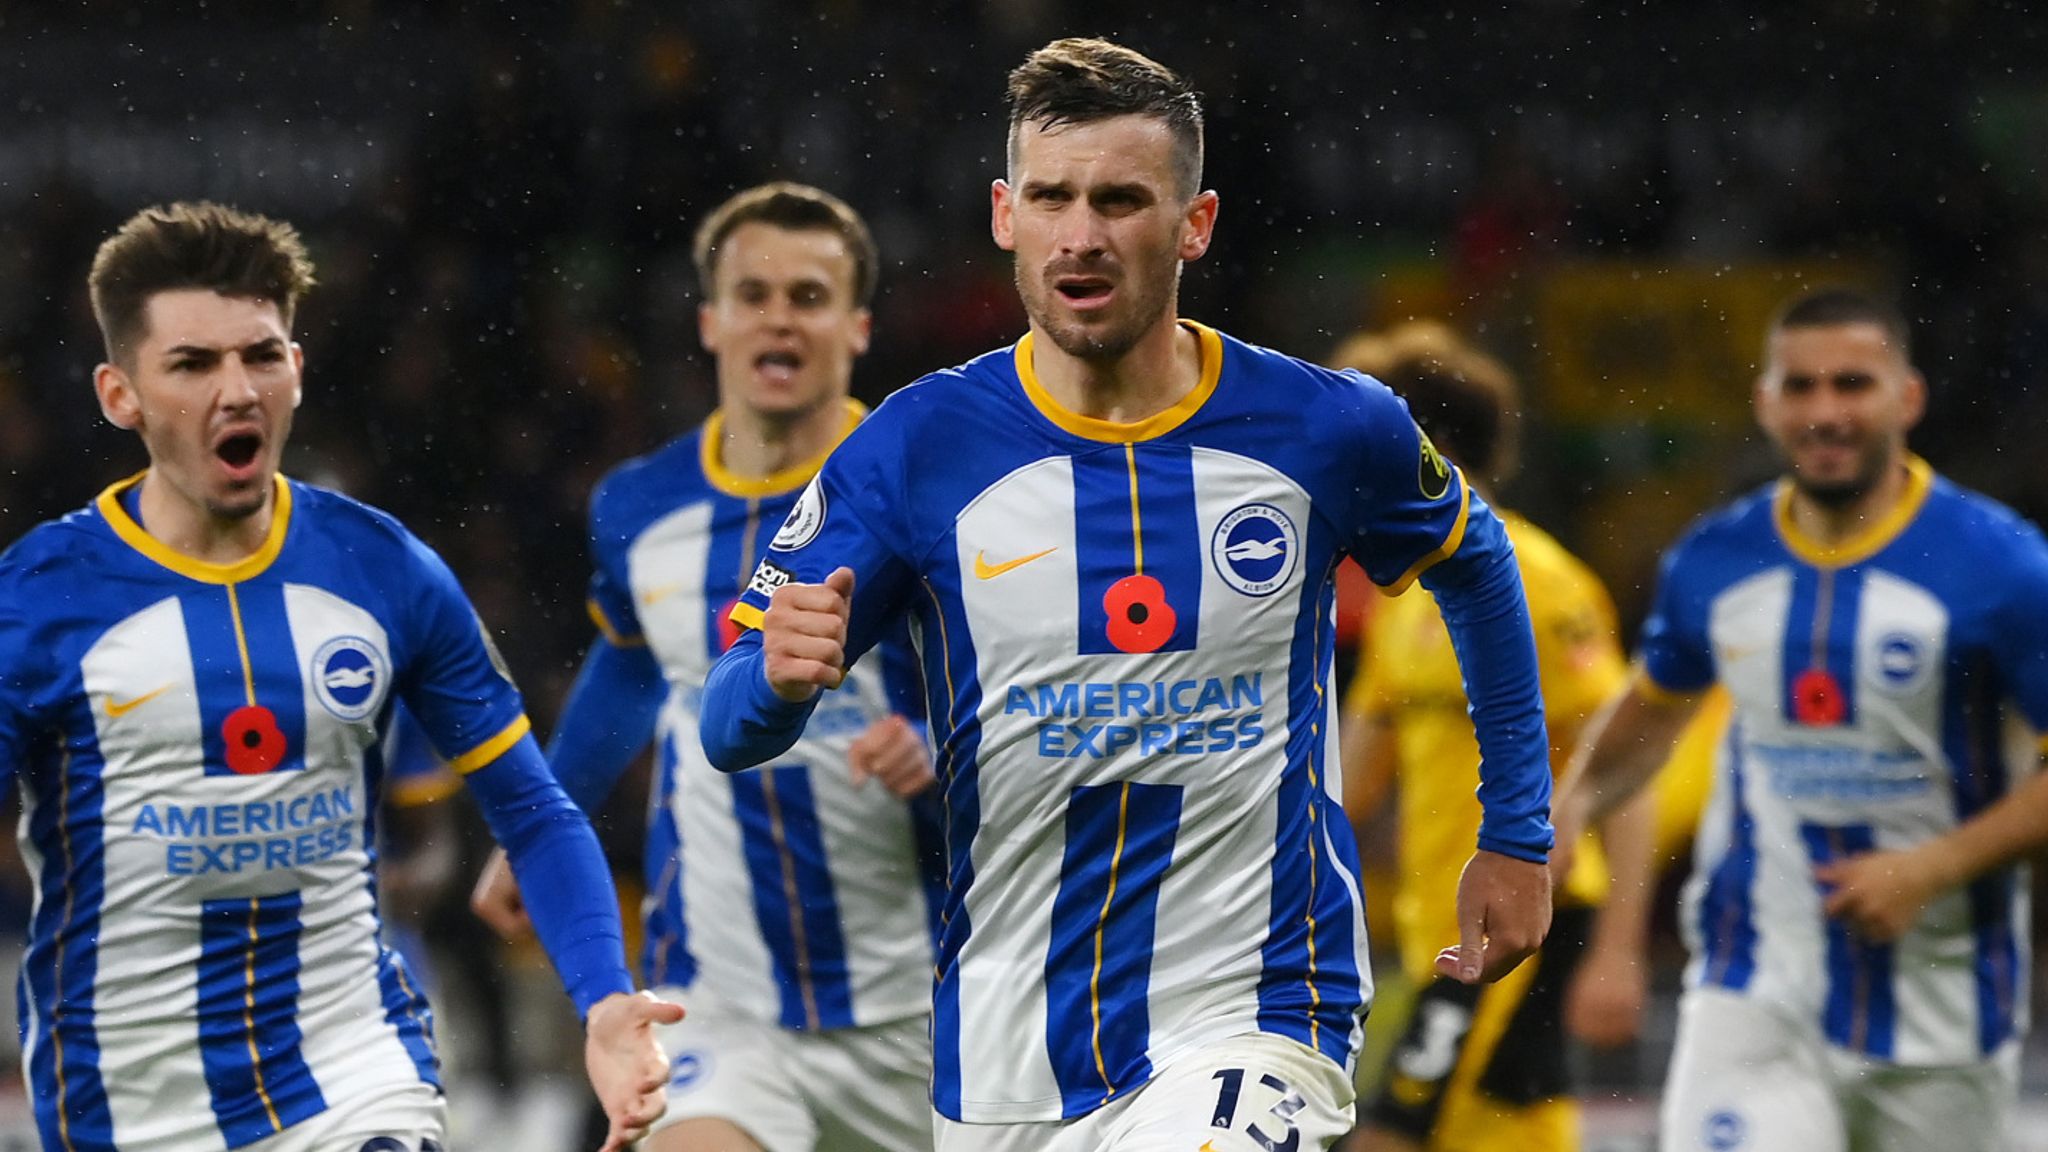 Wolves 2-3 Brighton: Pascal Gross scores late winner after Nelson Semedo's red card in thriller at Molineux | Football News | Sky Sports